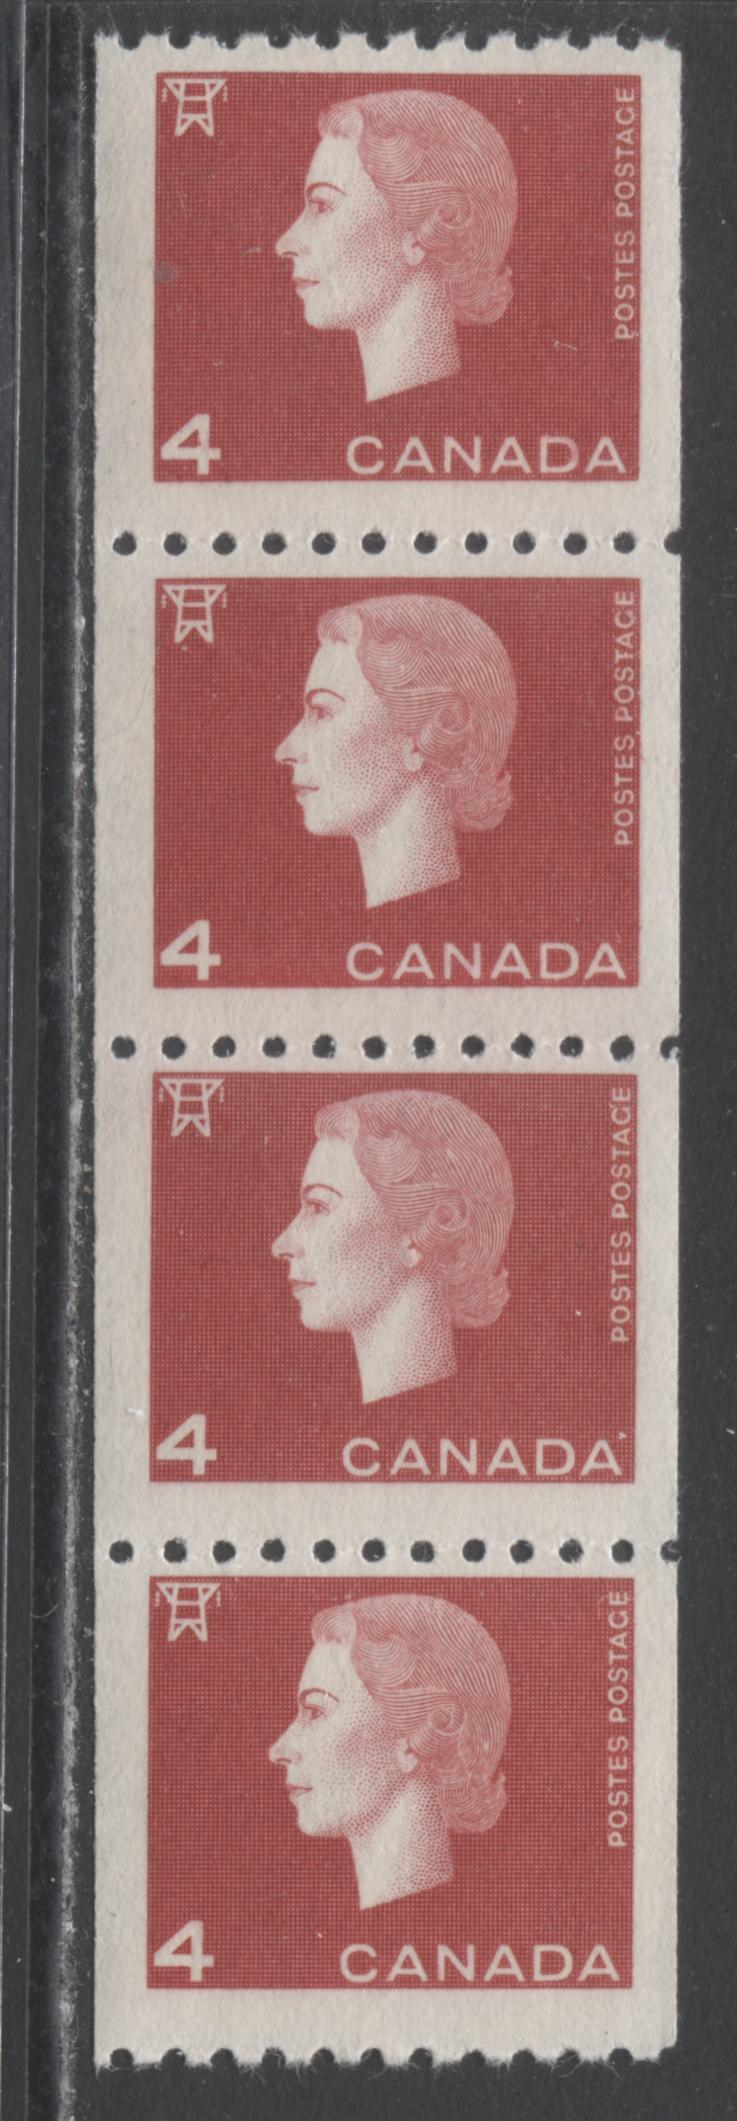 Lot 175 Canada #408i 4c Carmine Electricity, 1962-1963 Cameo Coil Issue, A VFNH Coil Jump Strip Of 4 With Narrow (3.5mm) Spacing Between Center Stamps And Smooth Dex Gum